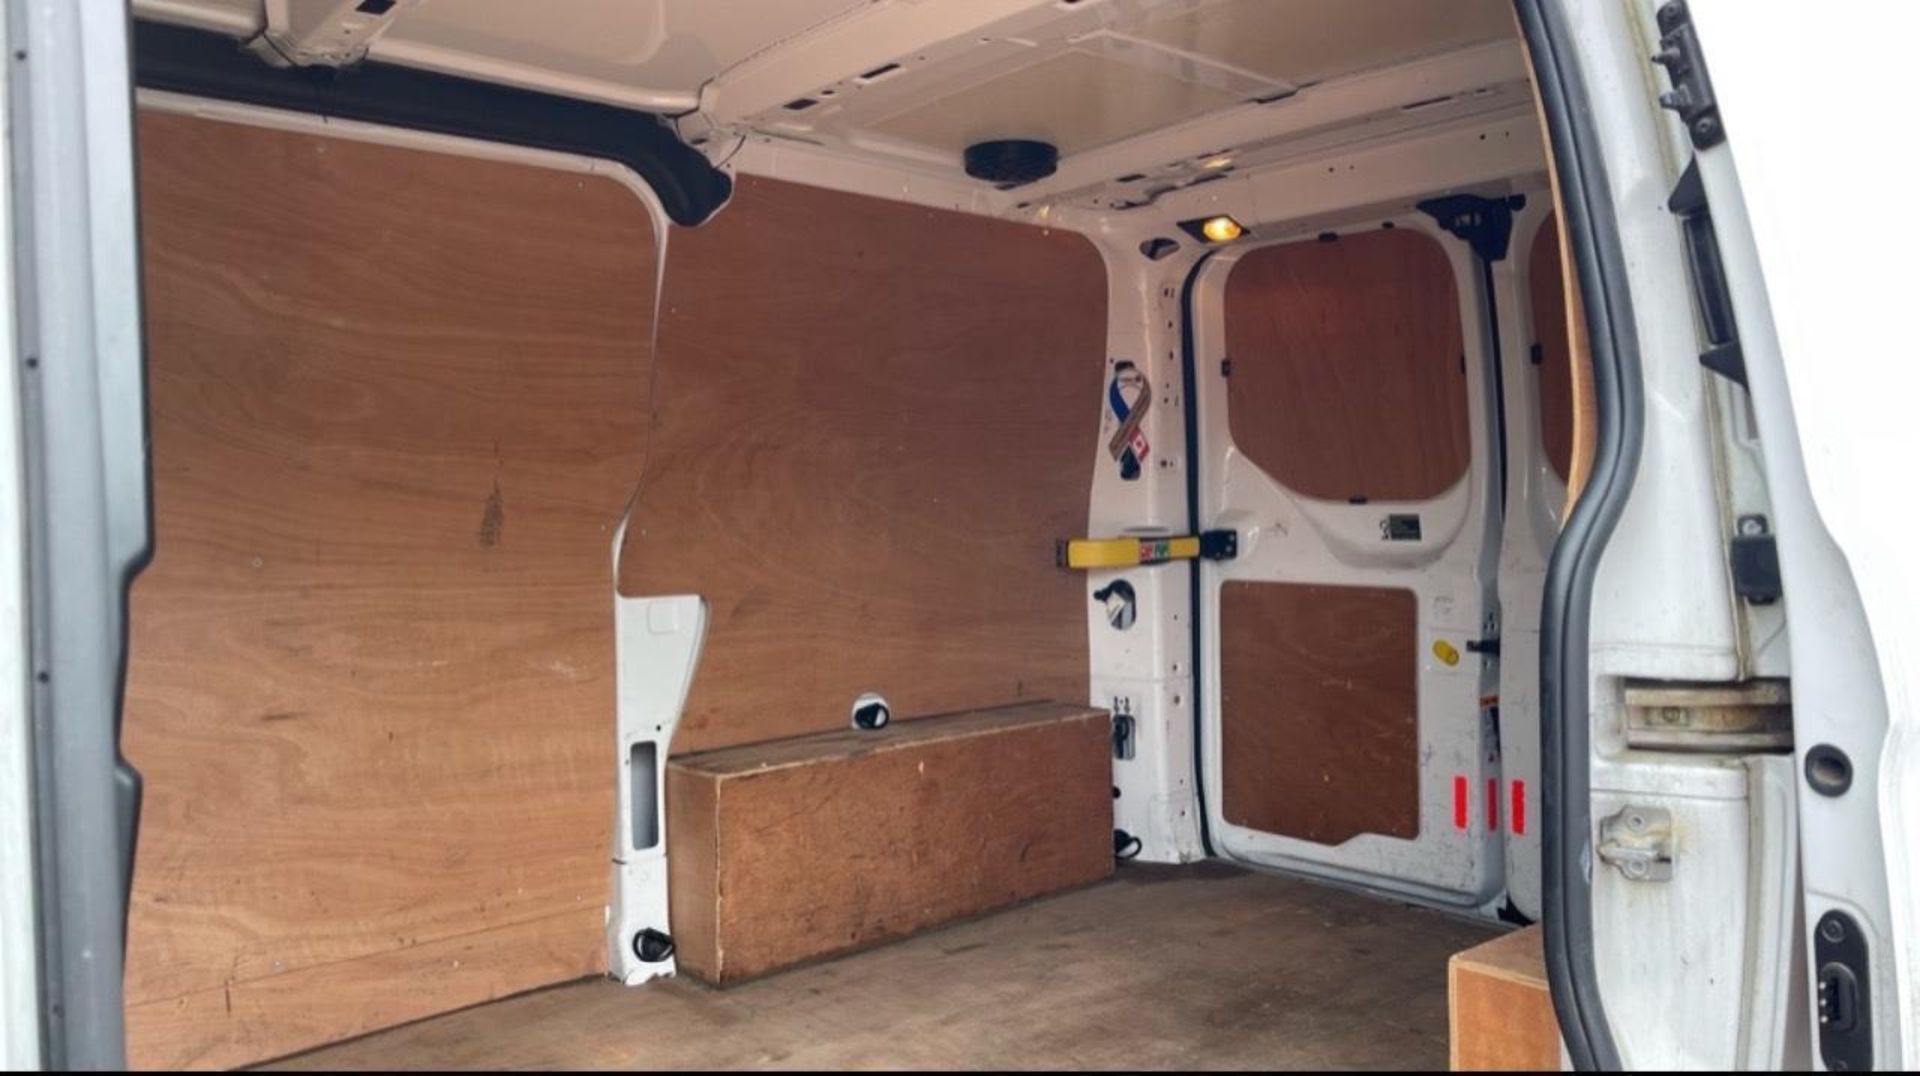 2015 FORD TRANSIT CUSTOM PANEL VAN - RELIABLE AND EFFICIENT WORKHORSE - Image 15 of 17